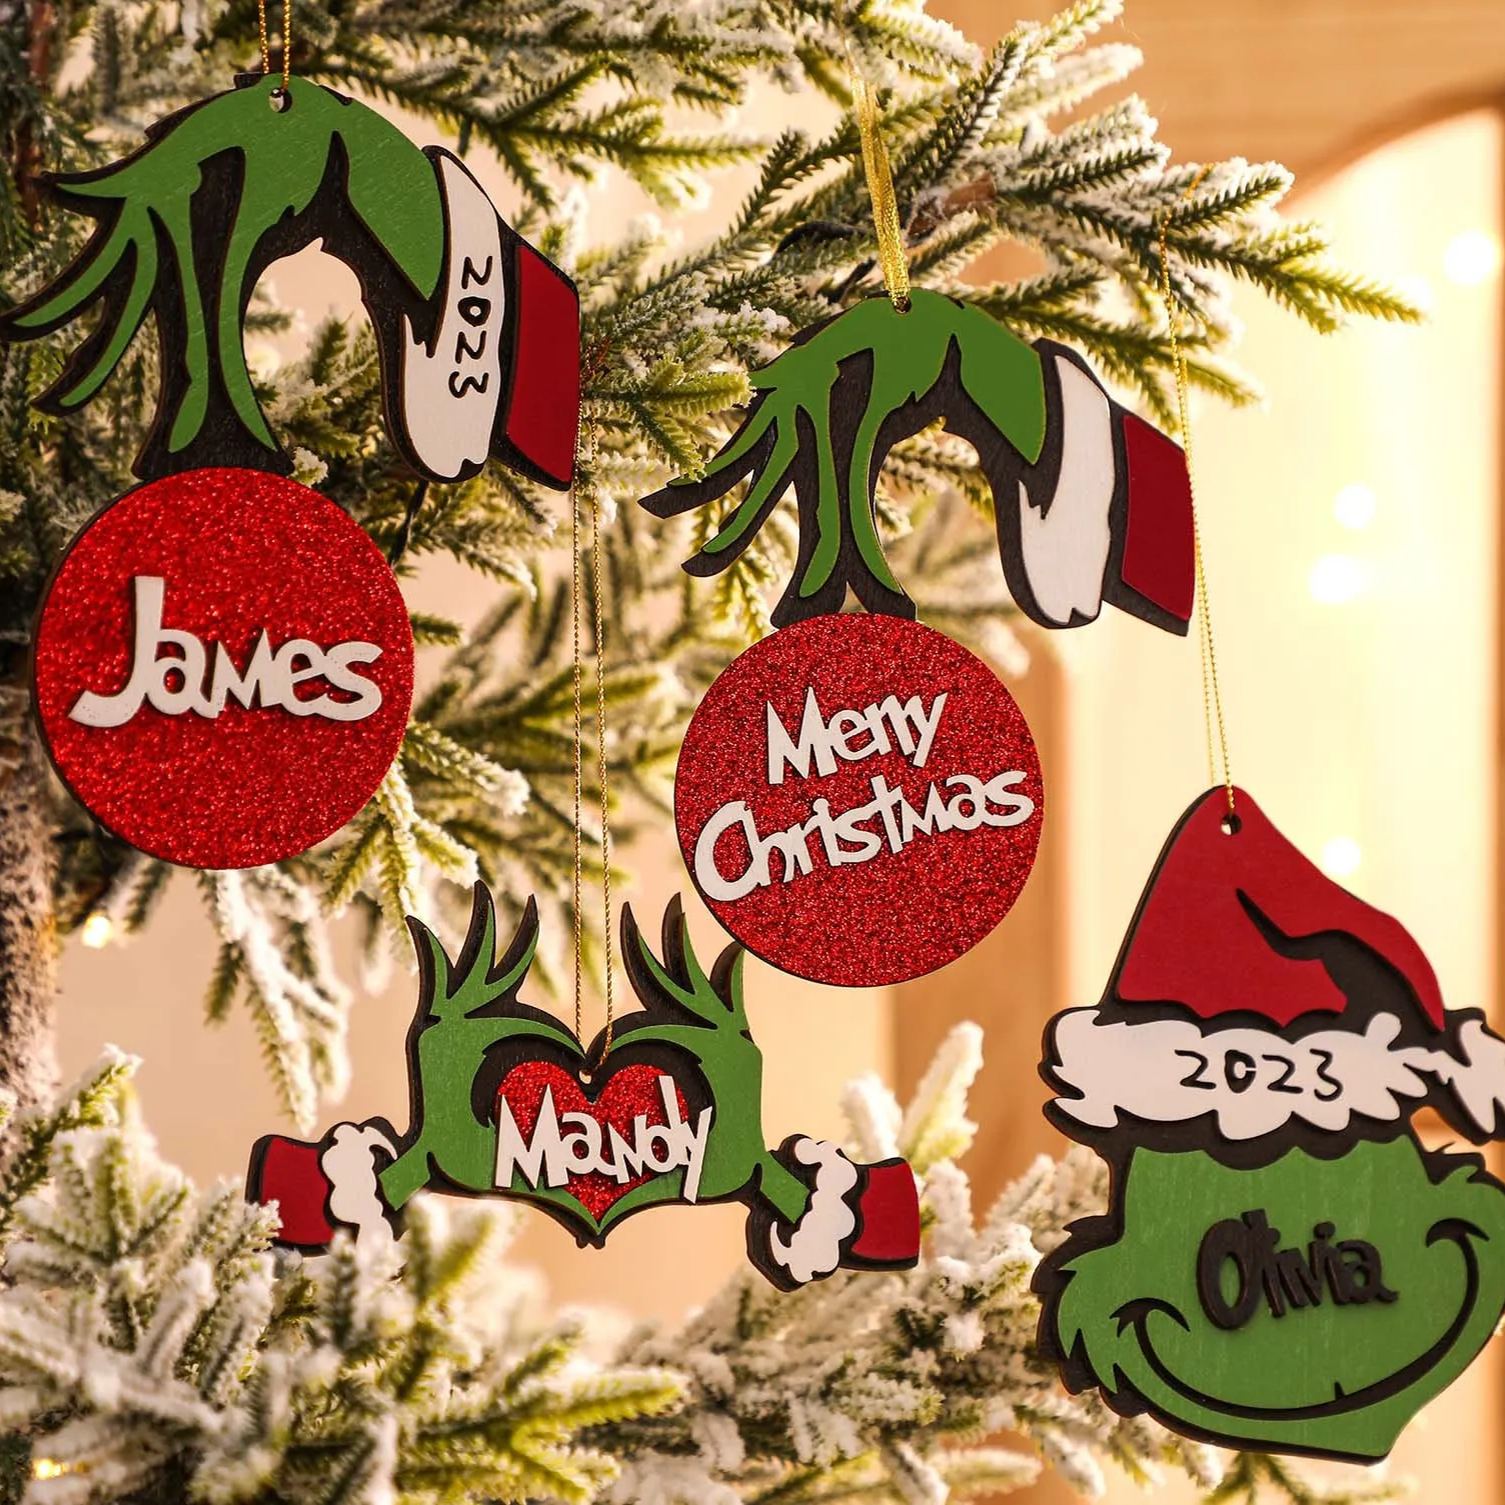 49% OPersonalized Grinch ornament——Christmas Ornaments, Green Monster